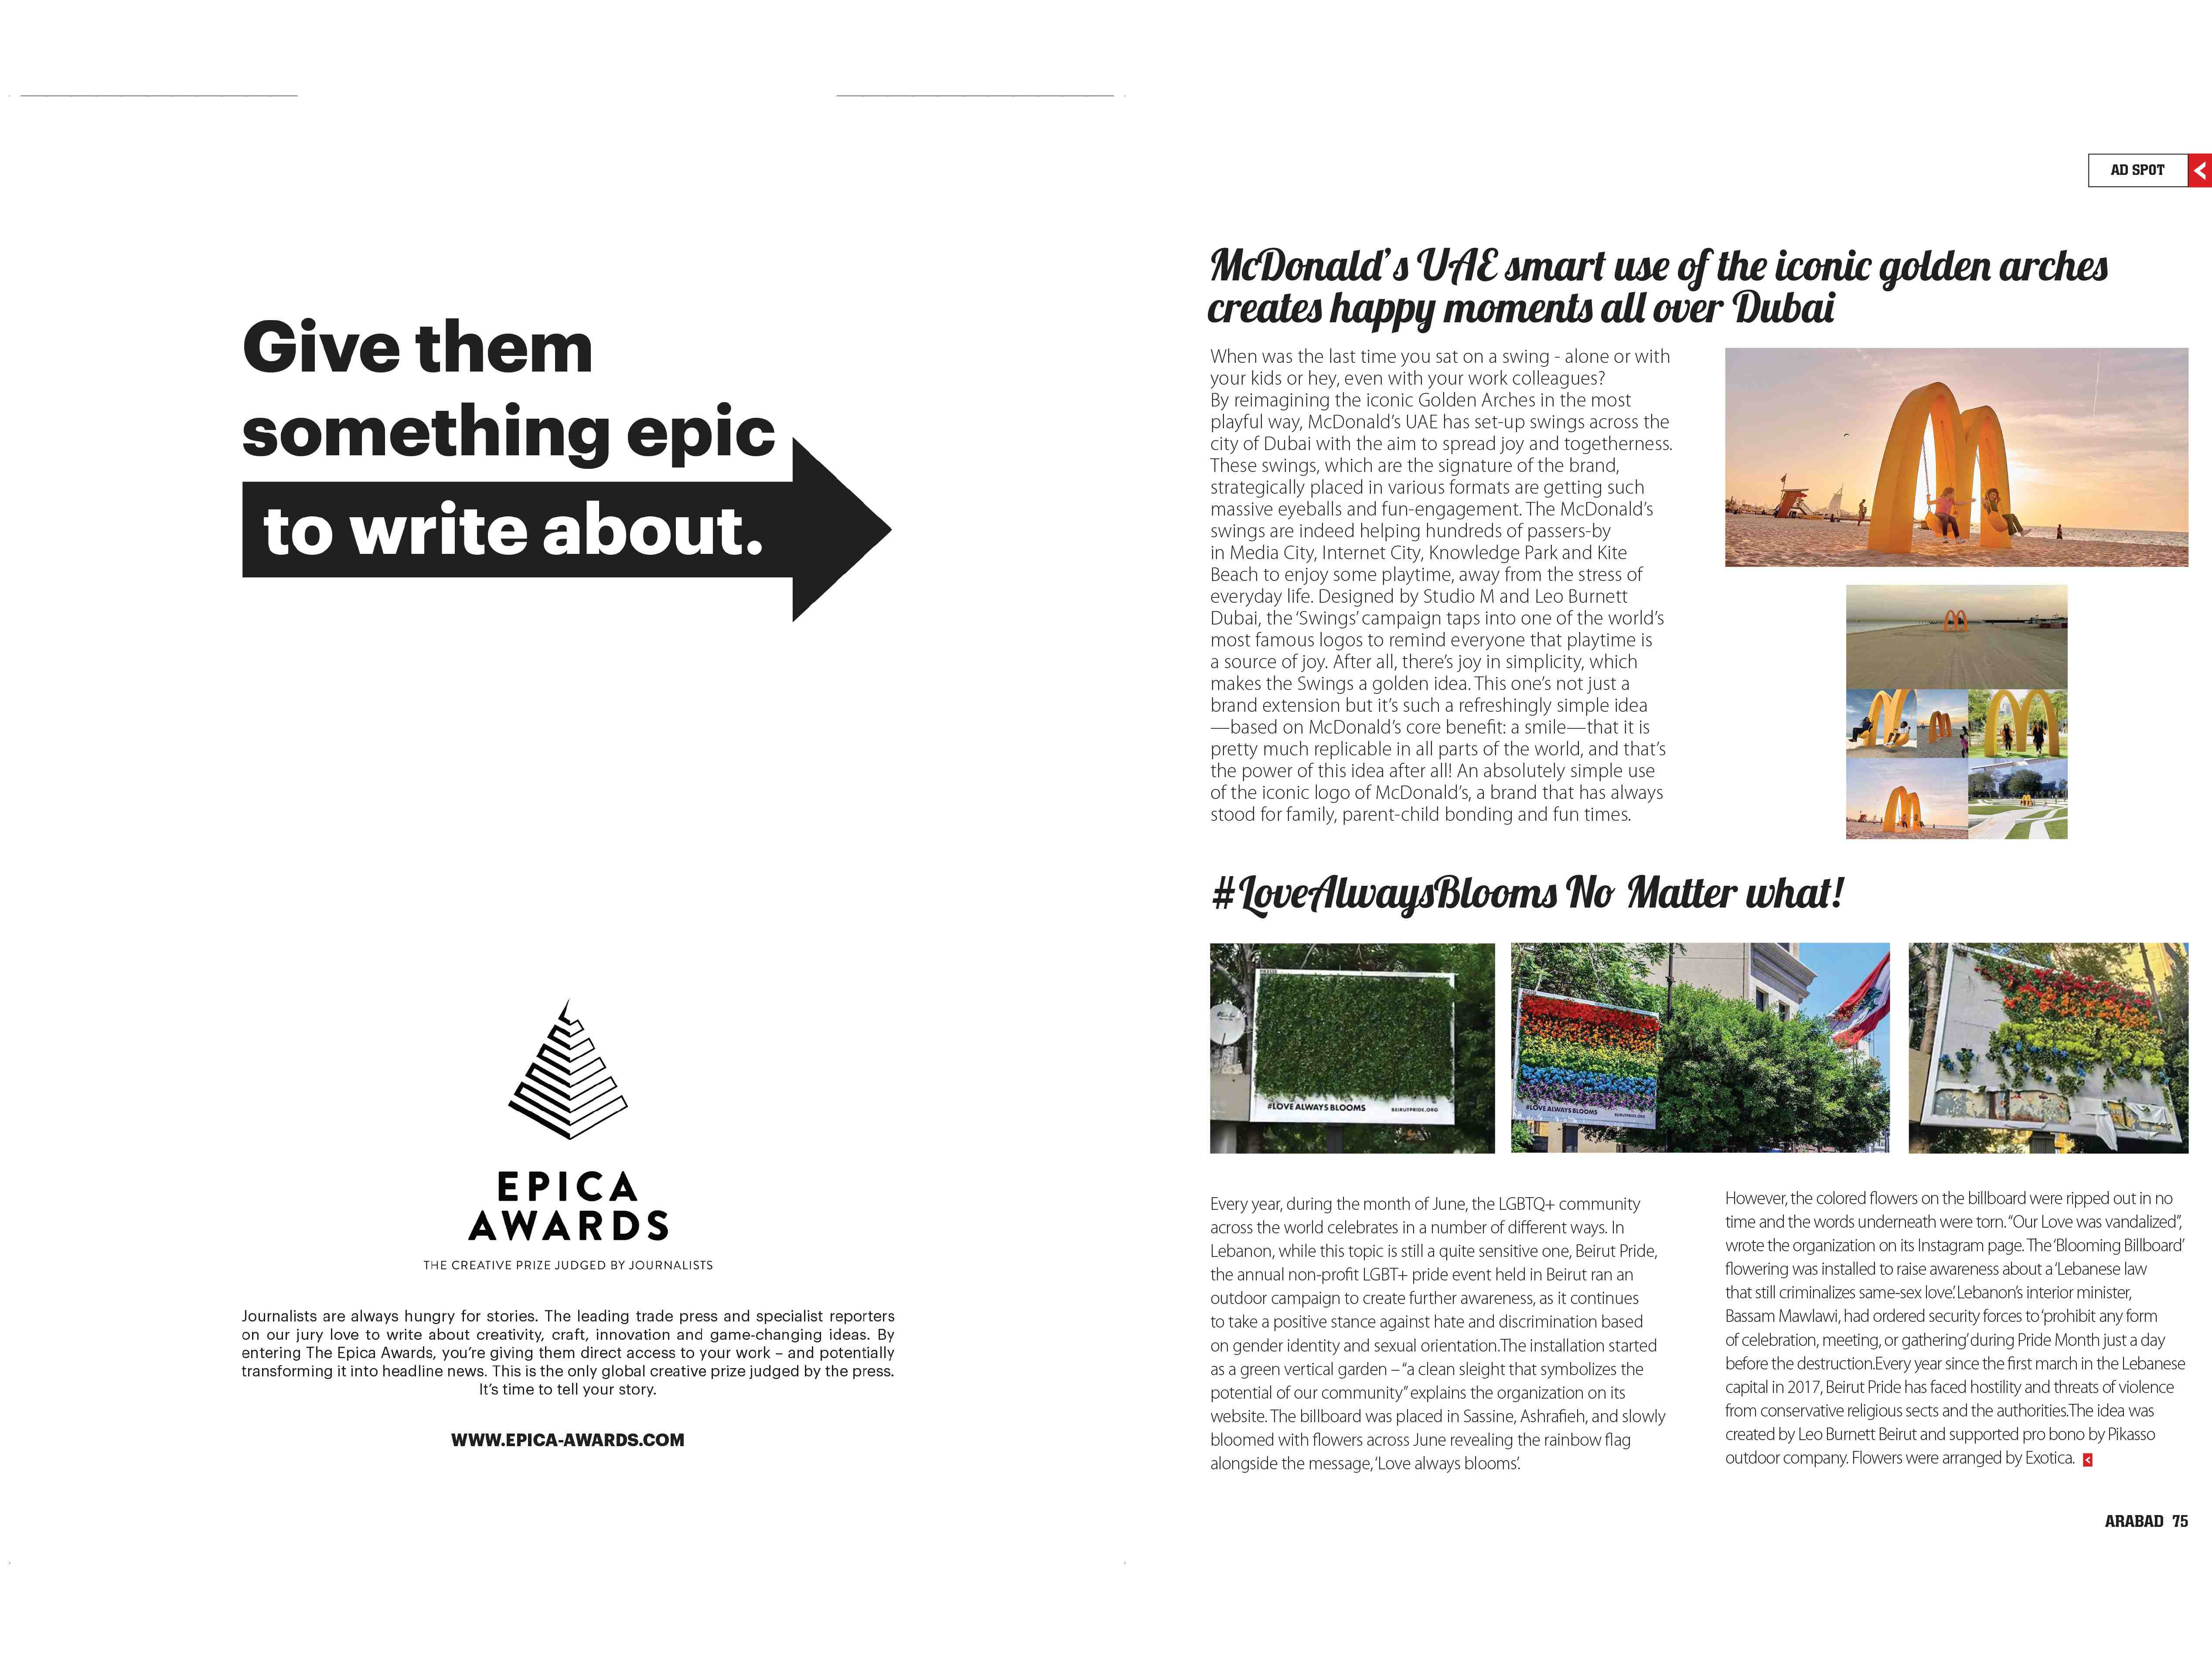 Epica challenges agencies to get “epic” work noticed via a campaign by VMLY&R